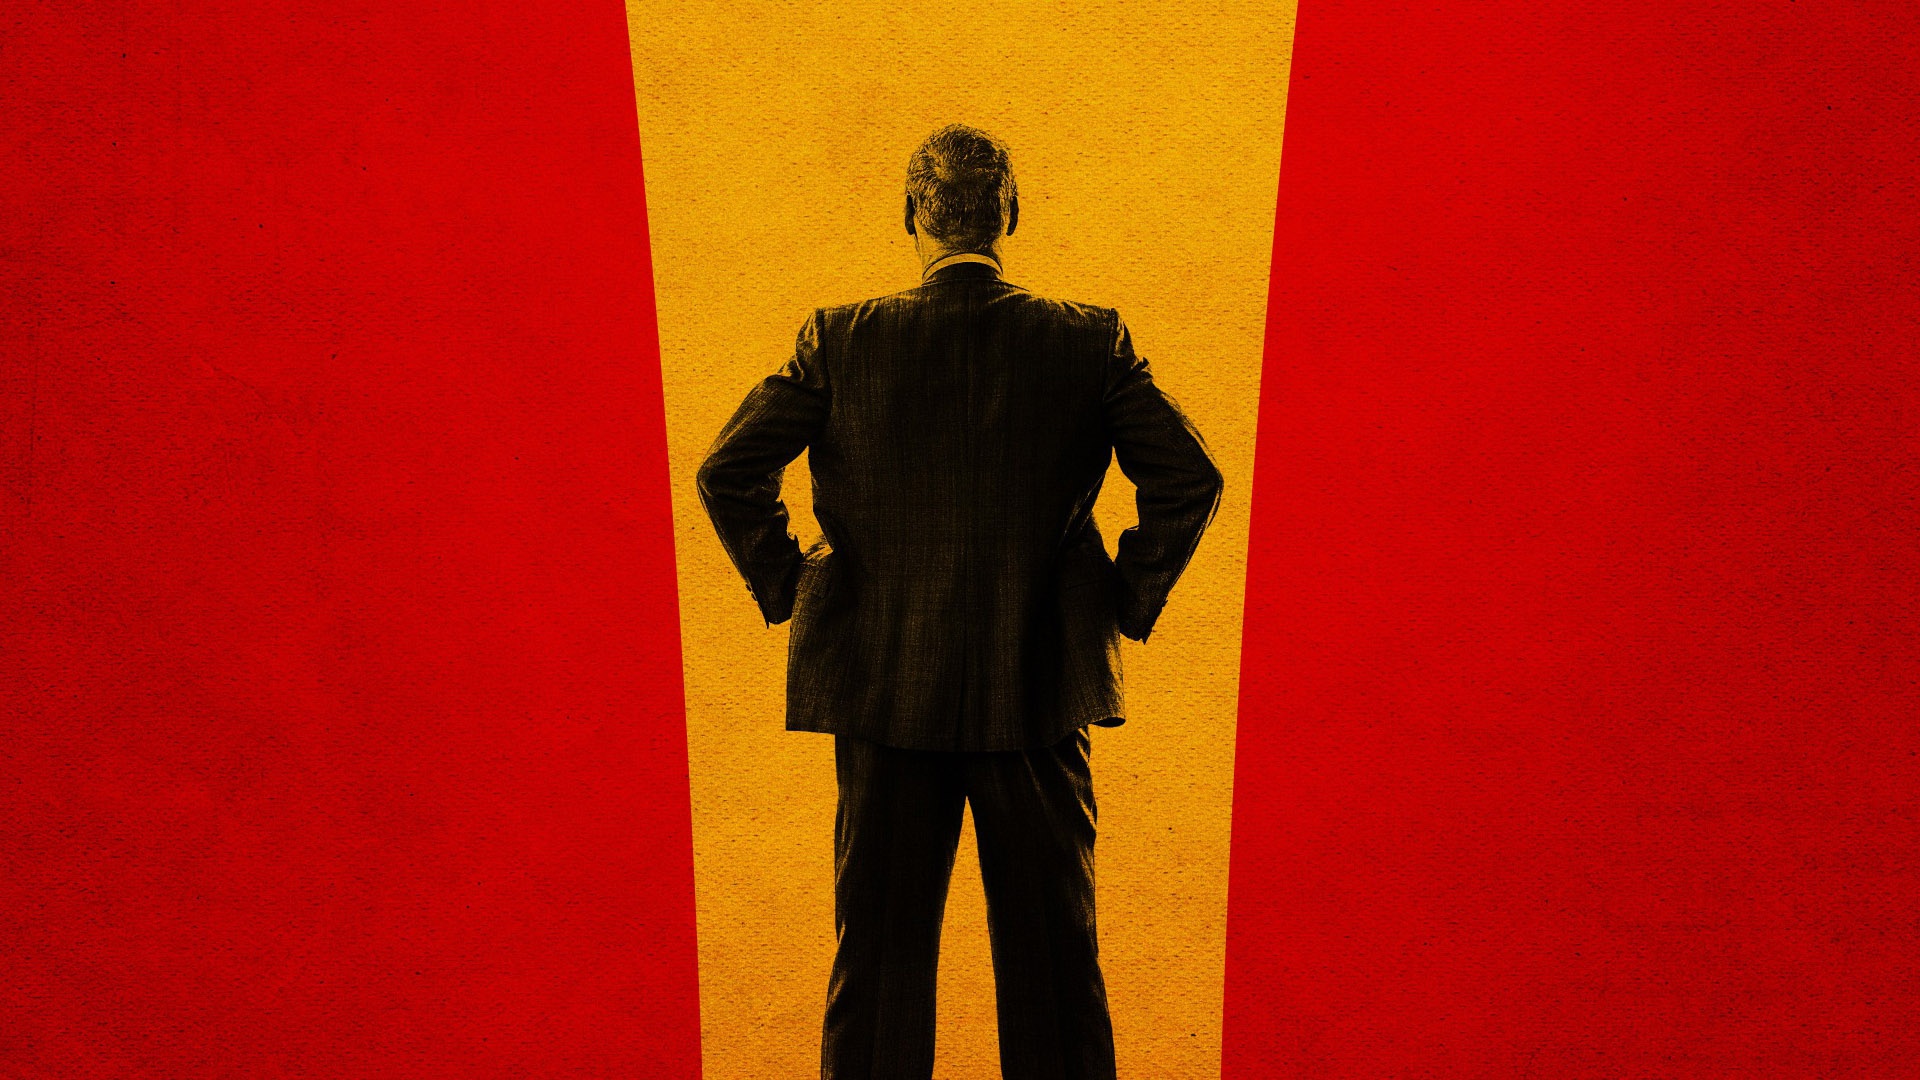 The Founder Poster Wallpapers 1920x1080 609093